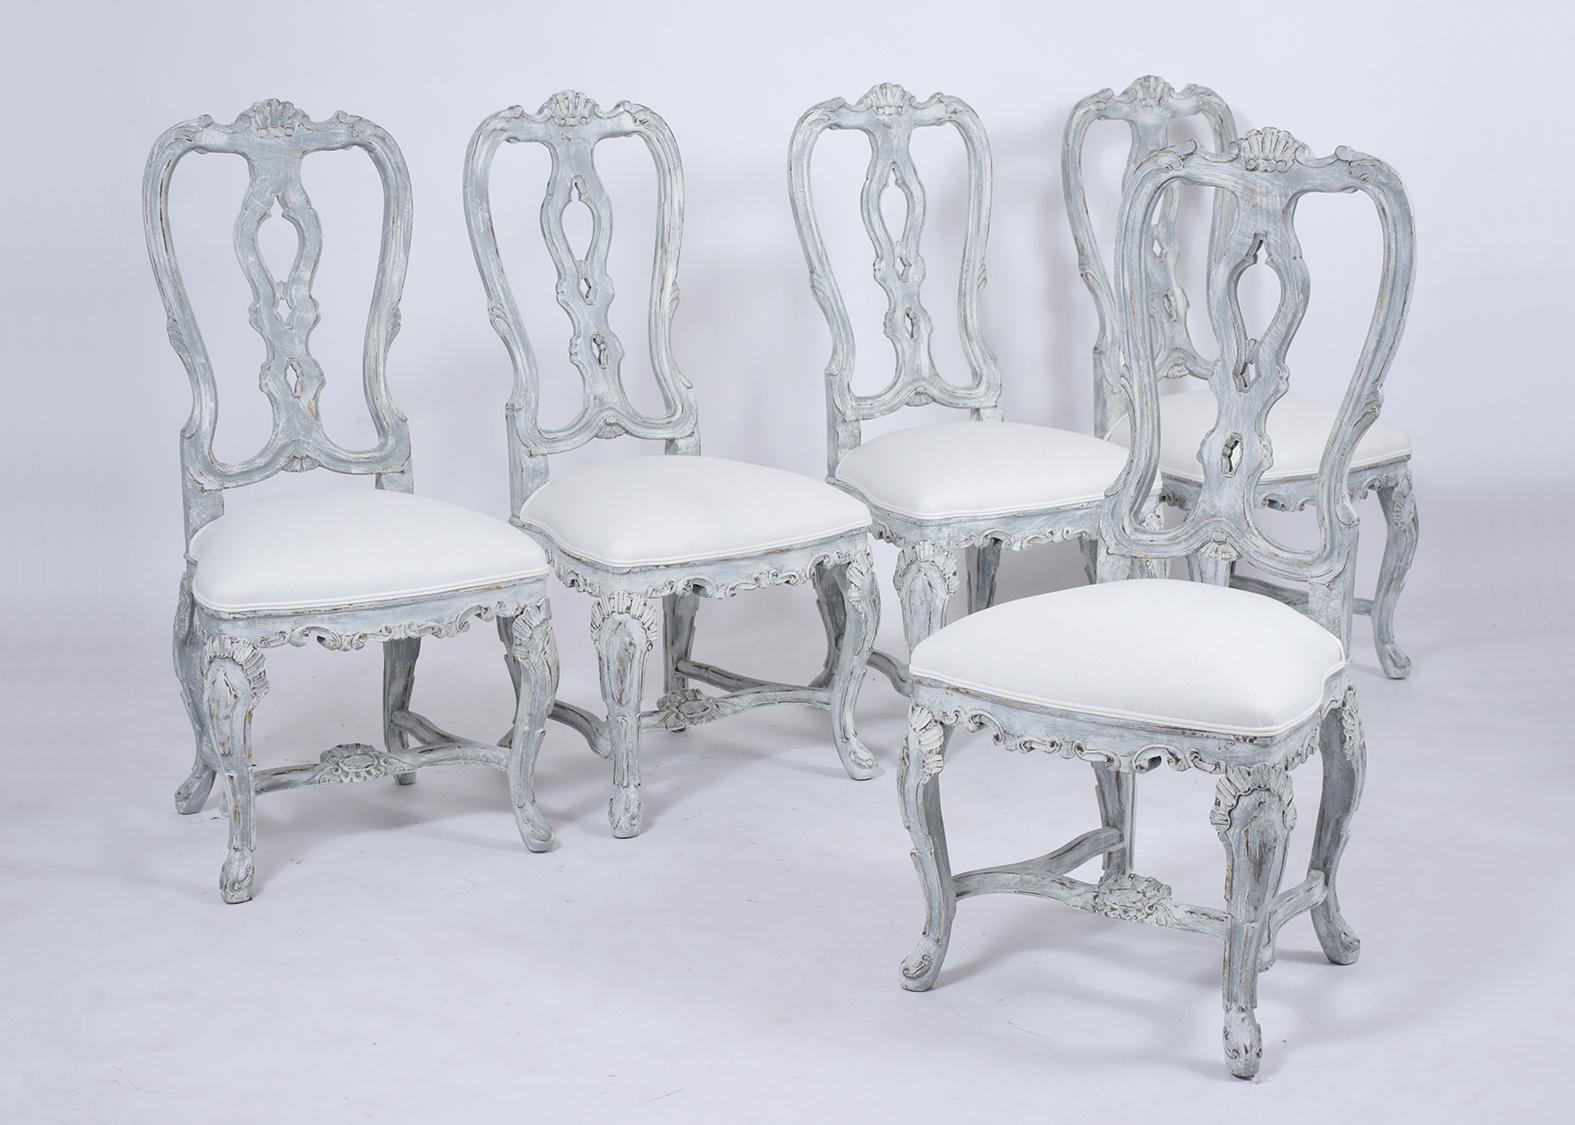 A remarkable antique set of twelve Italian dining chairs handcrafted out of maple wood featuring eleven side chairs and a single armchair with grotto-style carved details throughout the entire frame. The seat rest on sturdy carved stretched legs